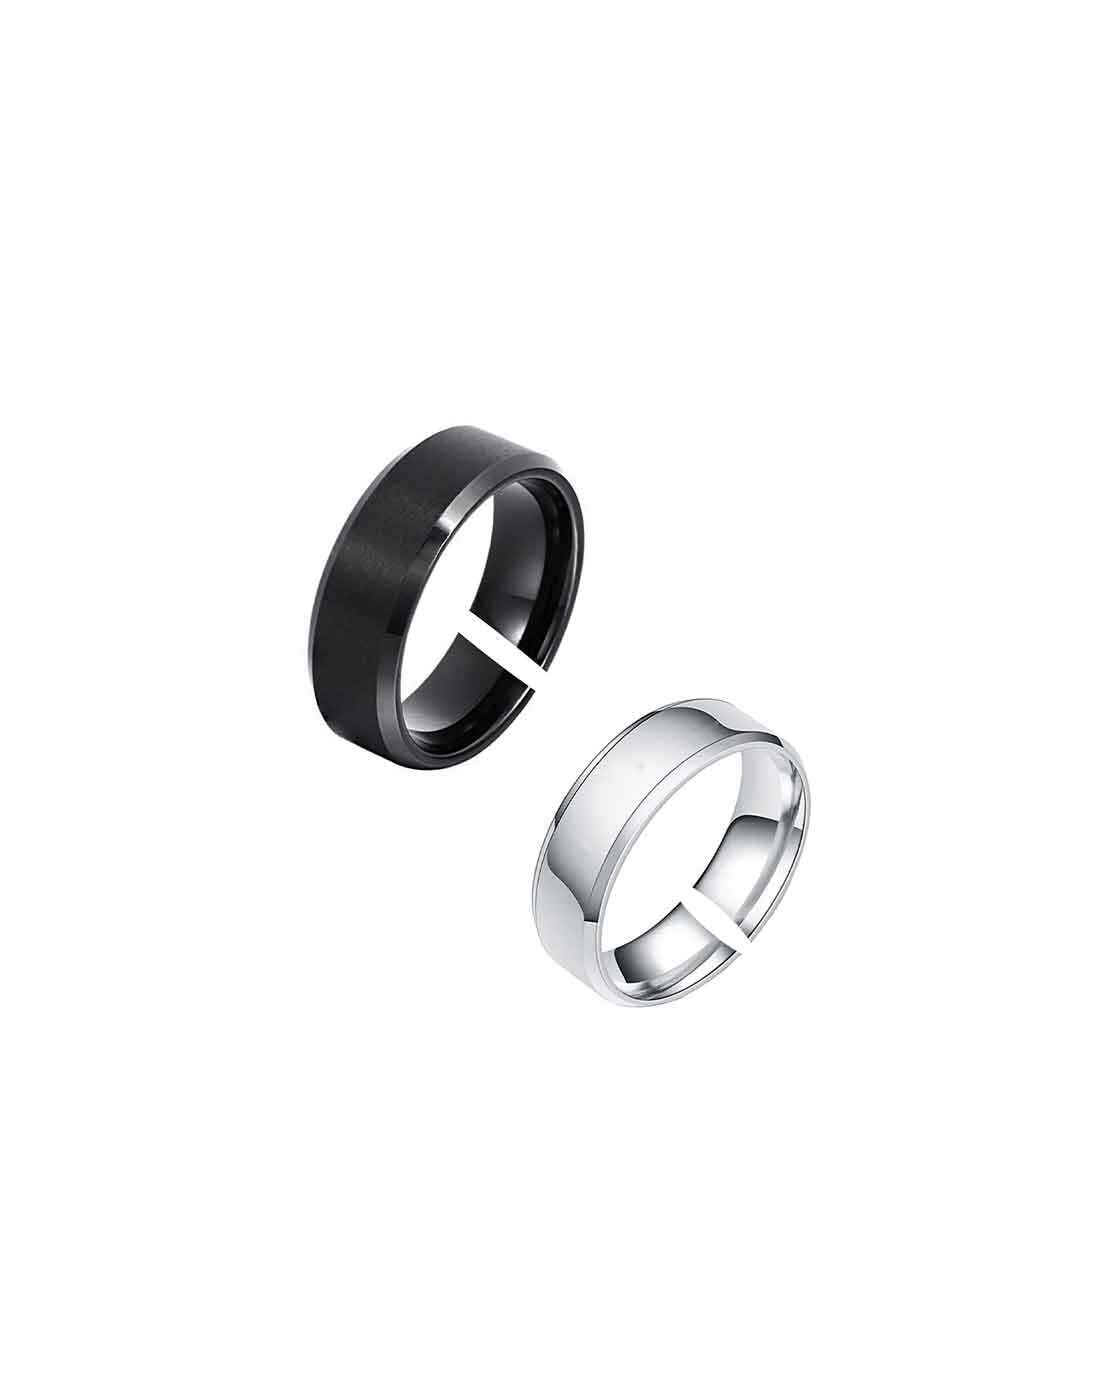 Buy Silver-Toned Rings for Men by Salty Online | Ajio.com